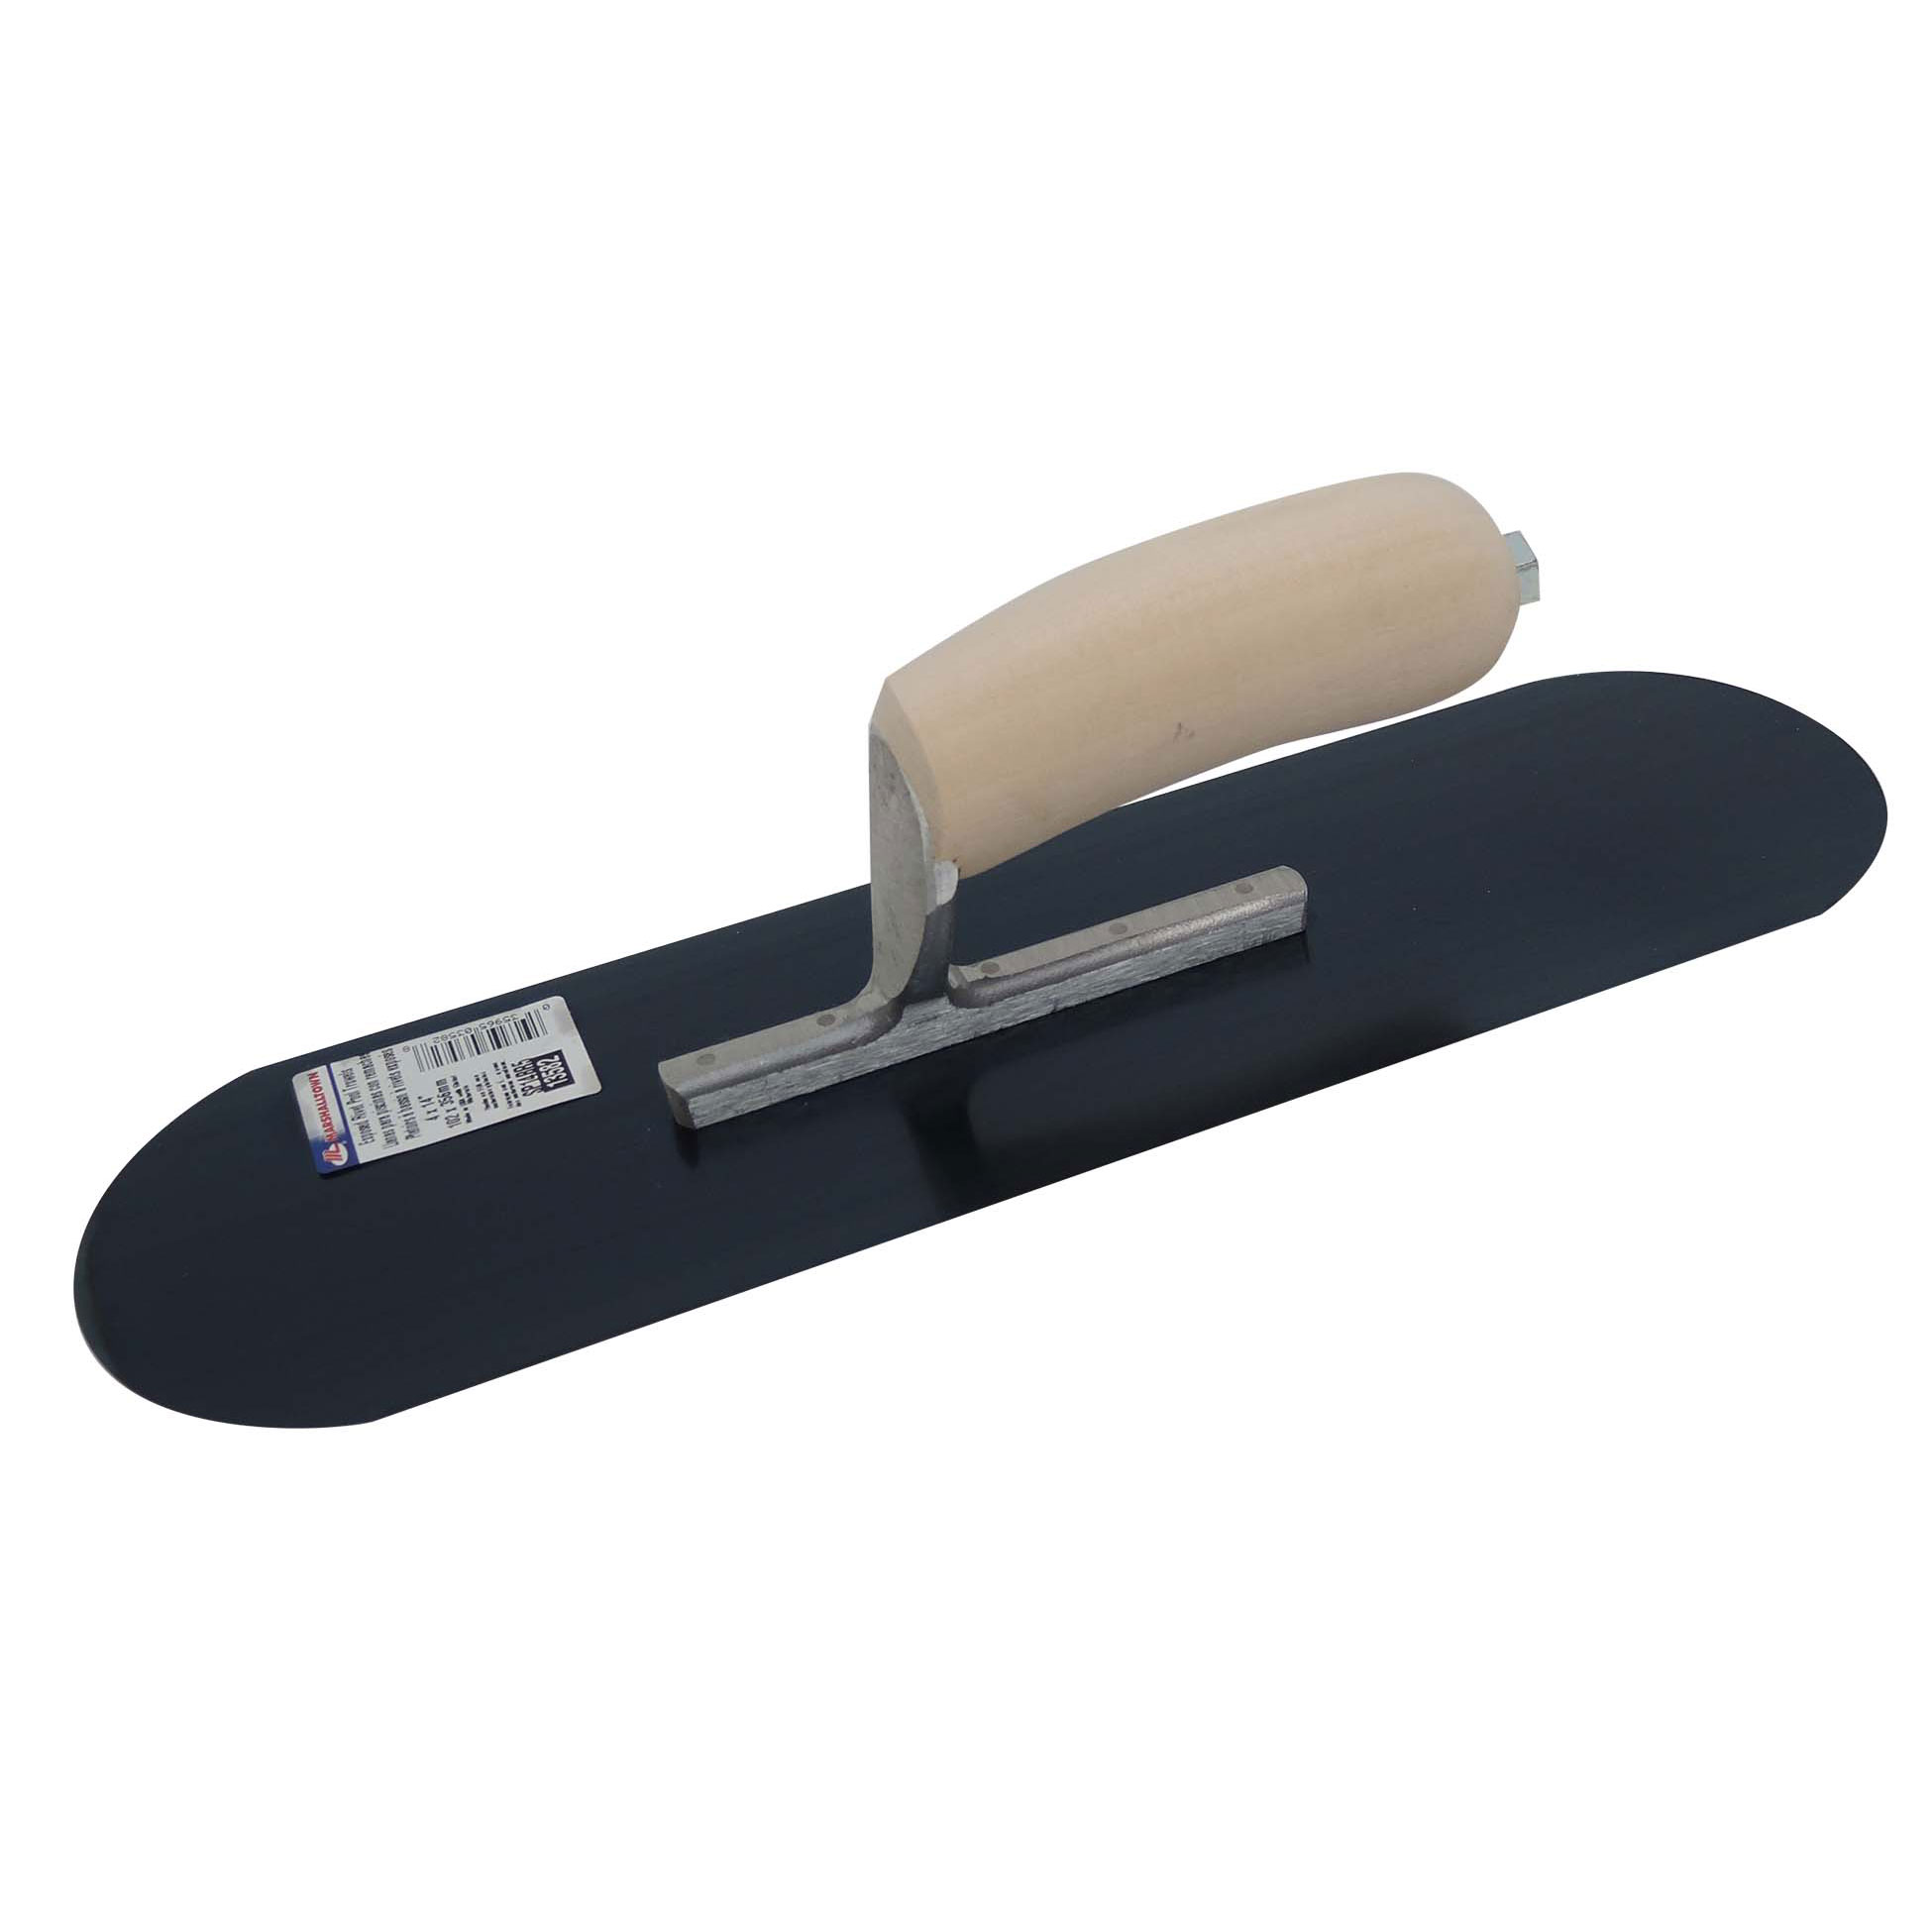 Marshalltown SP1635BR8 16in x 3-1/2in Fully Rounded Trowel with Exposed Rivet Trowels and Wood Handle SP1635BR8